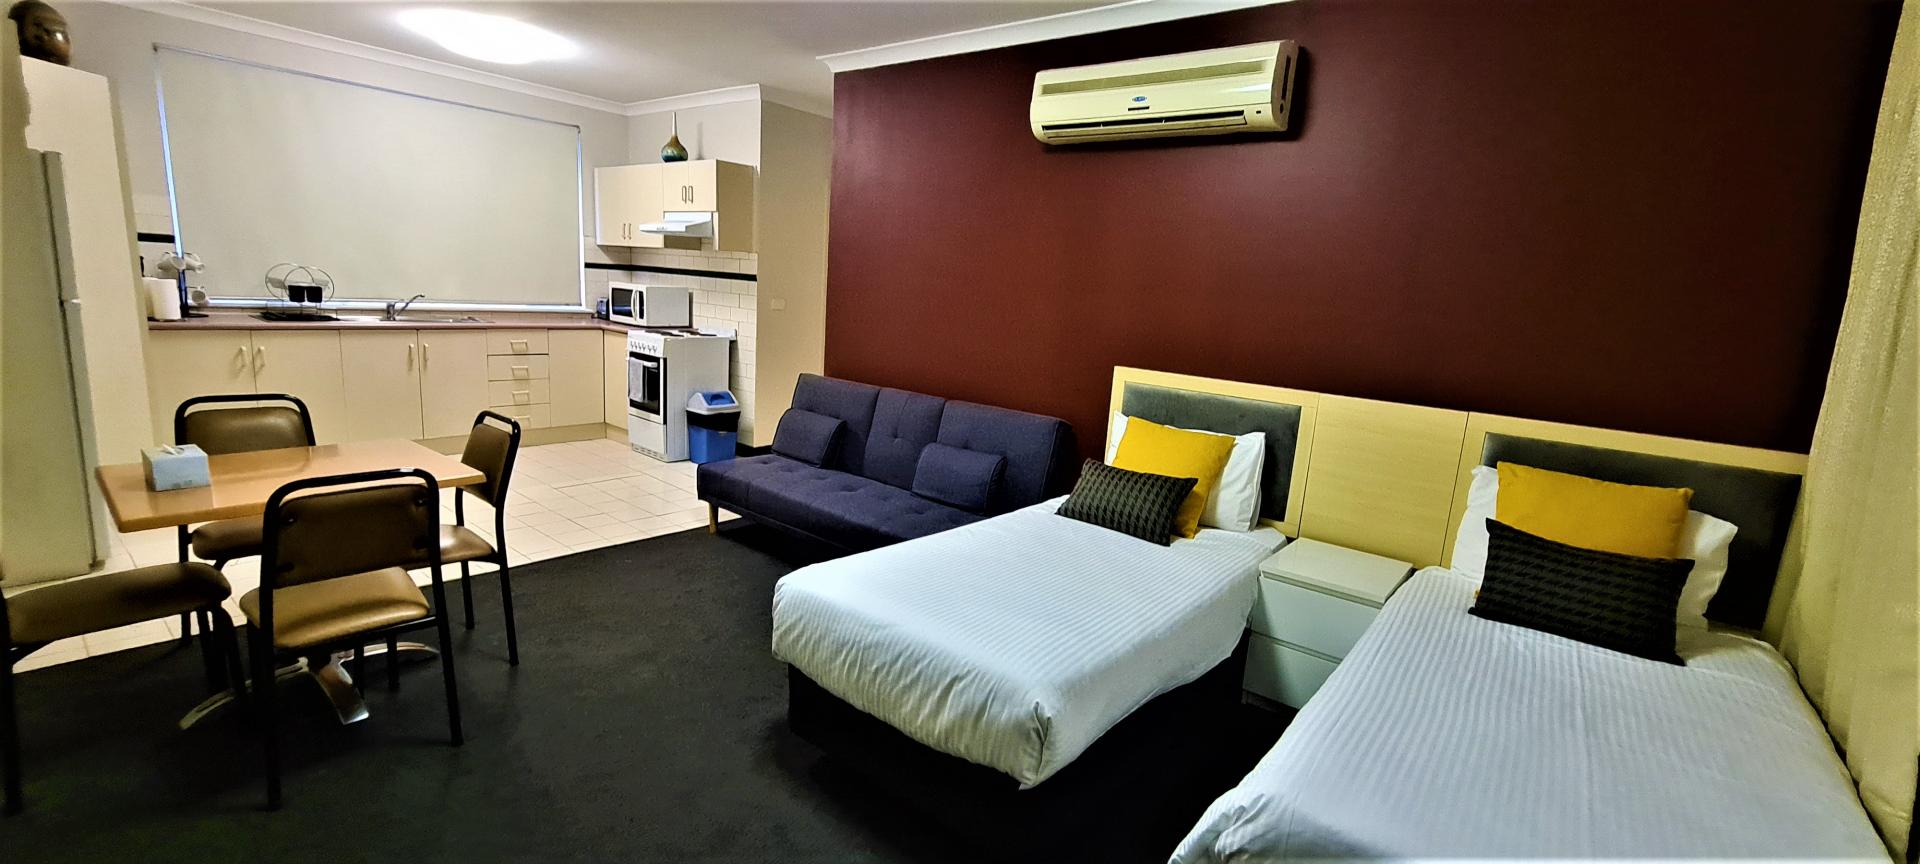 Hotel Room Northern Suburbs Melbourne